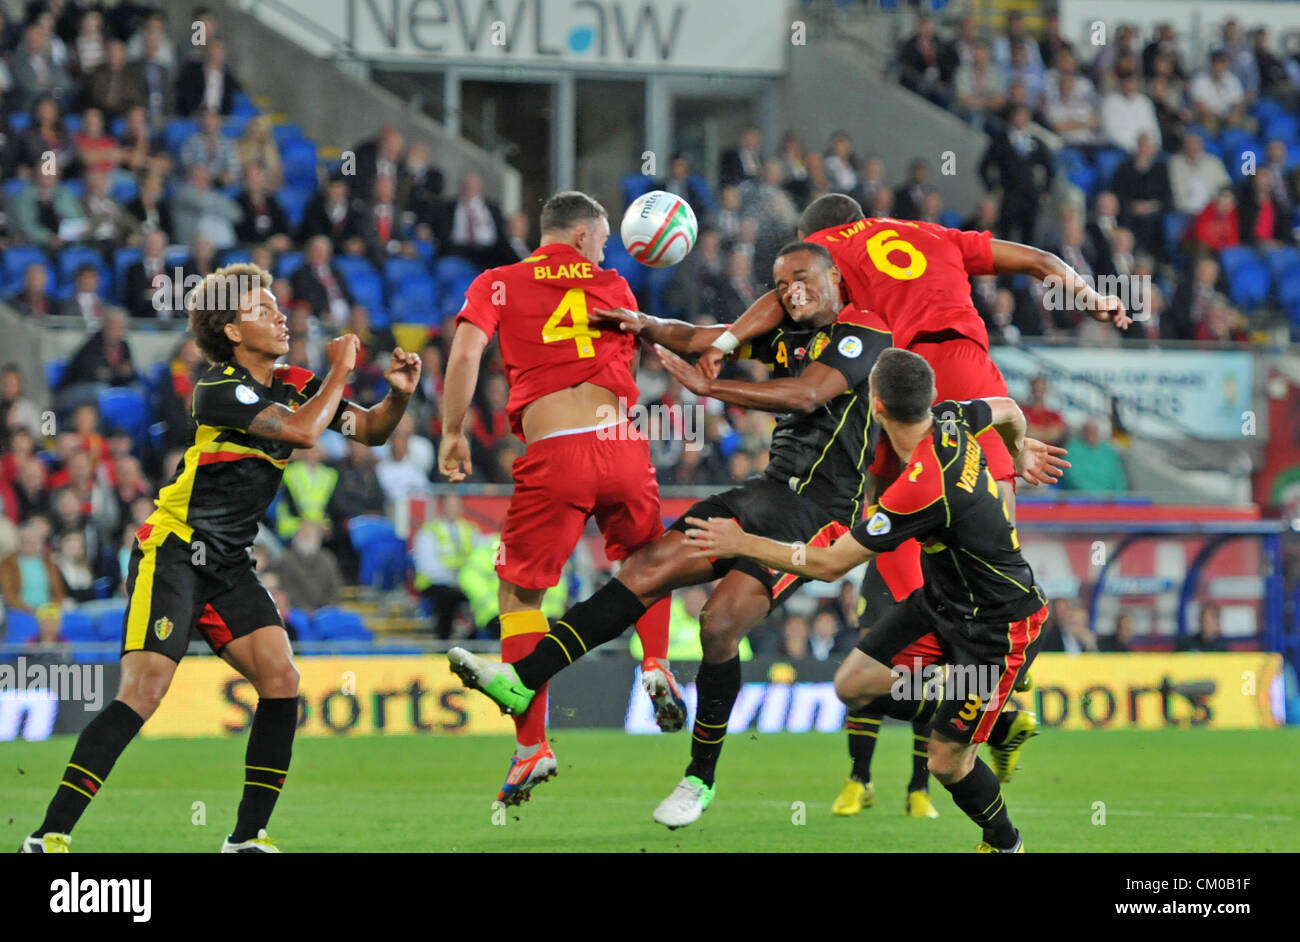 FIFA 2014 World Cup Qualifying Match - Wales v Belgium at the Cardiff City Stadium : Vincent Kompany of Belgium challenges Ashley Williams and Darcy Blake for the ball. Stock Photo